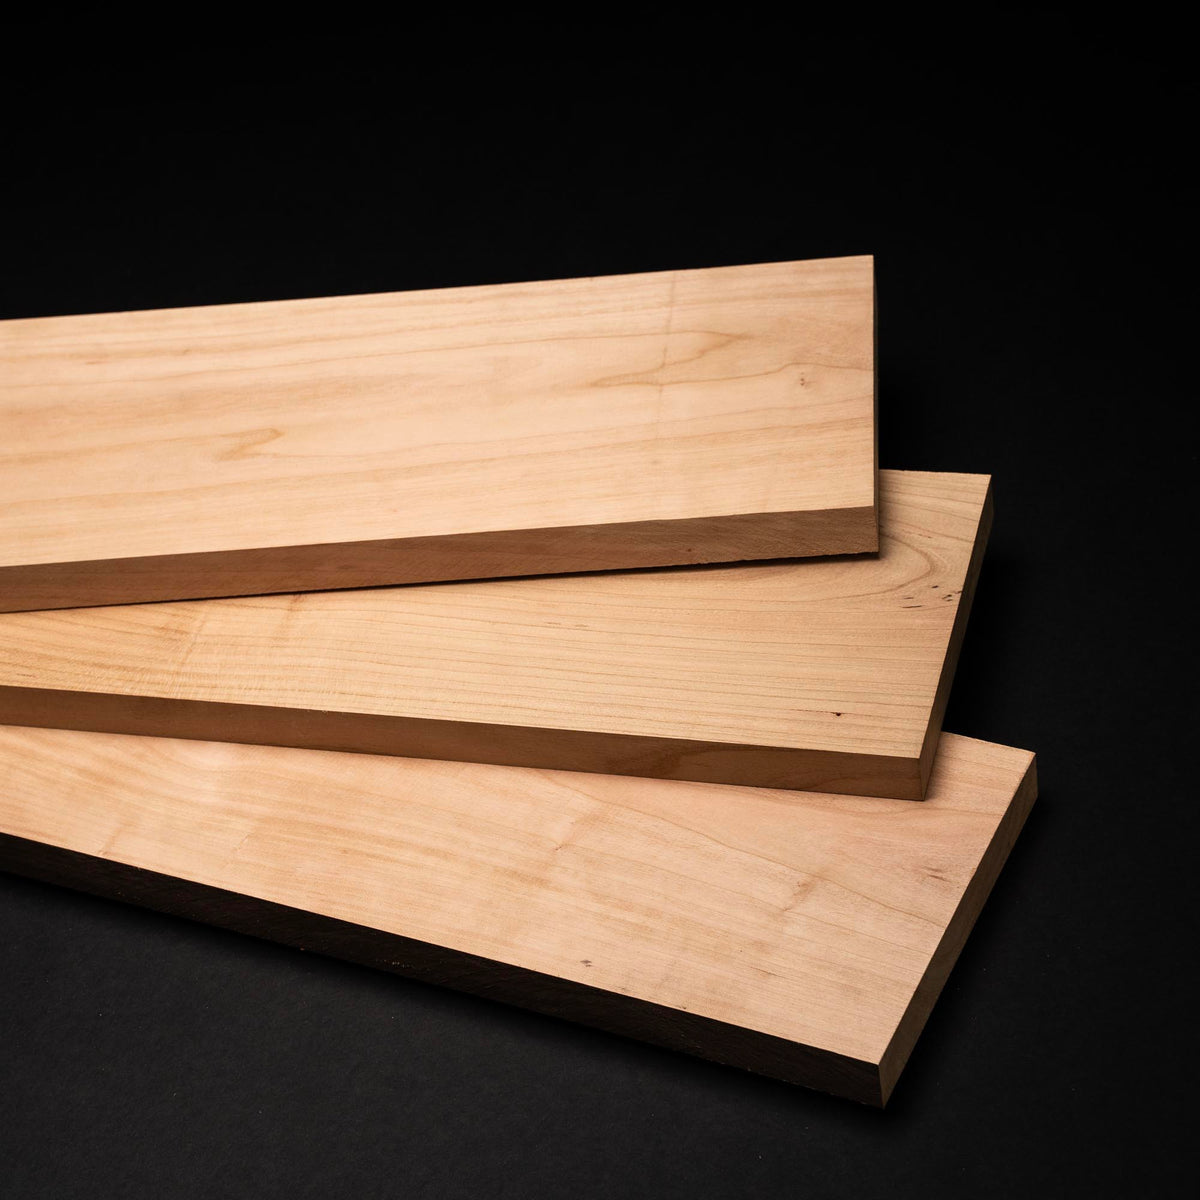 4/4 1&quot; Cherry Lumber Pack, S3S Clear/Select Boards - Kiln Dried - Packs of 10, 50, 100 Board Feet